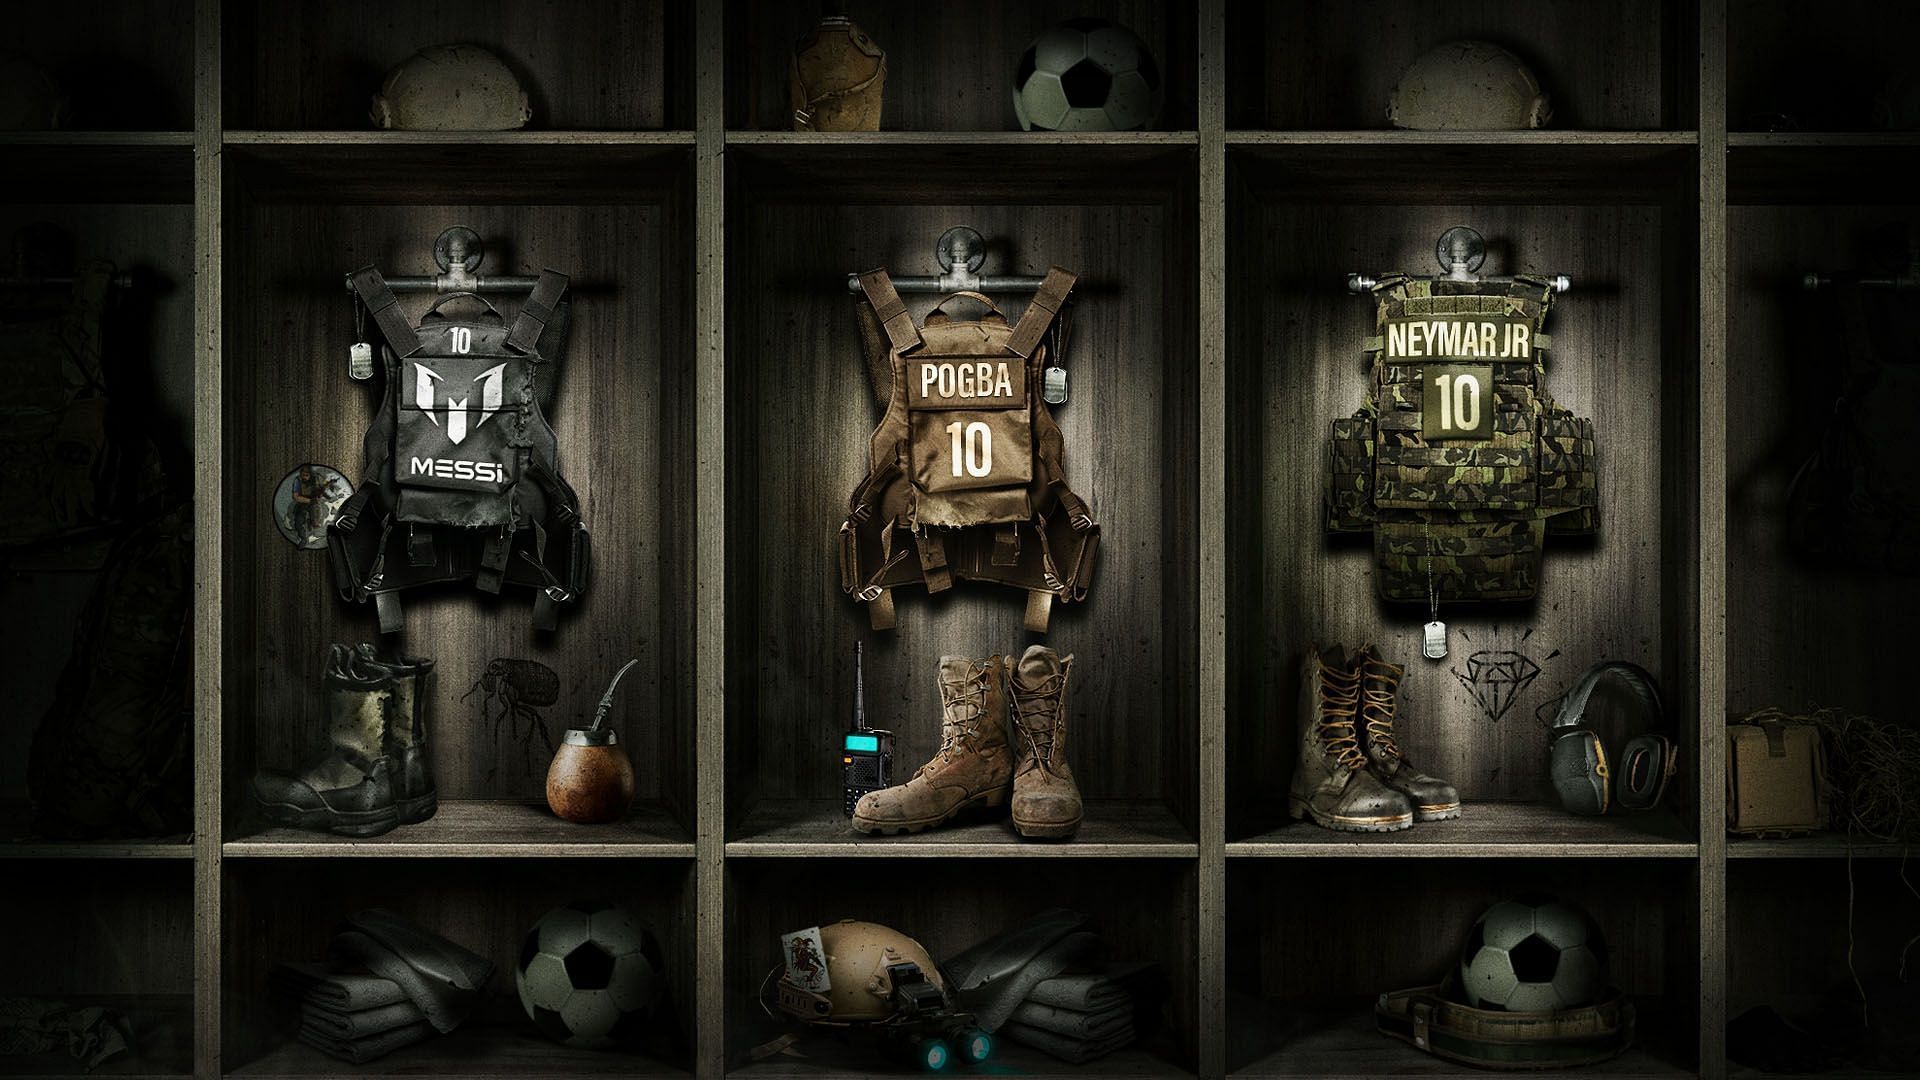 Messi, Neymar and Pogba are coming to Call of Duty (Image via Activision)